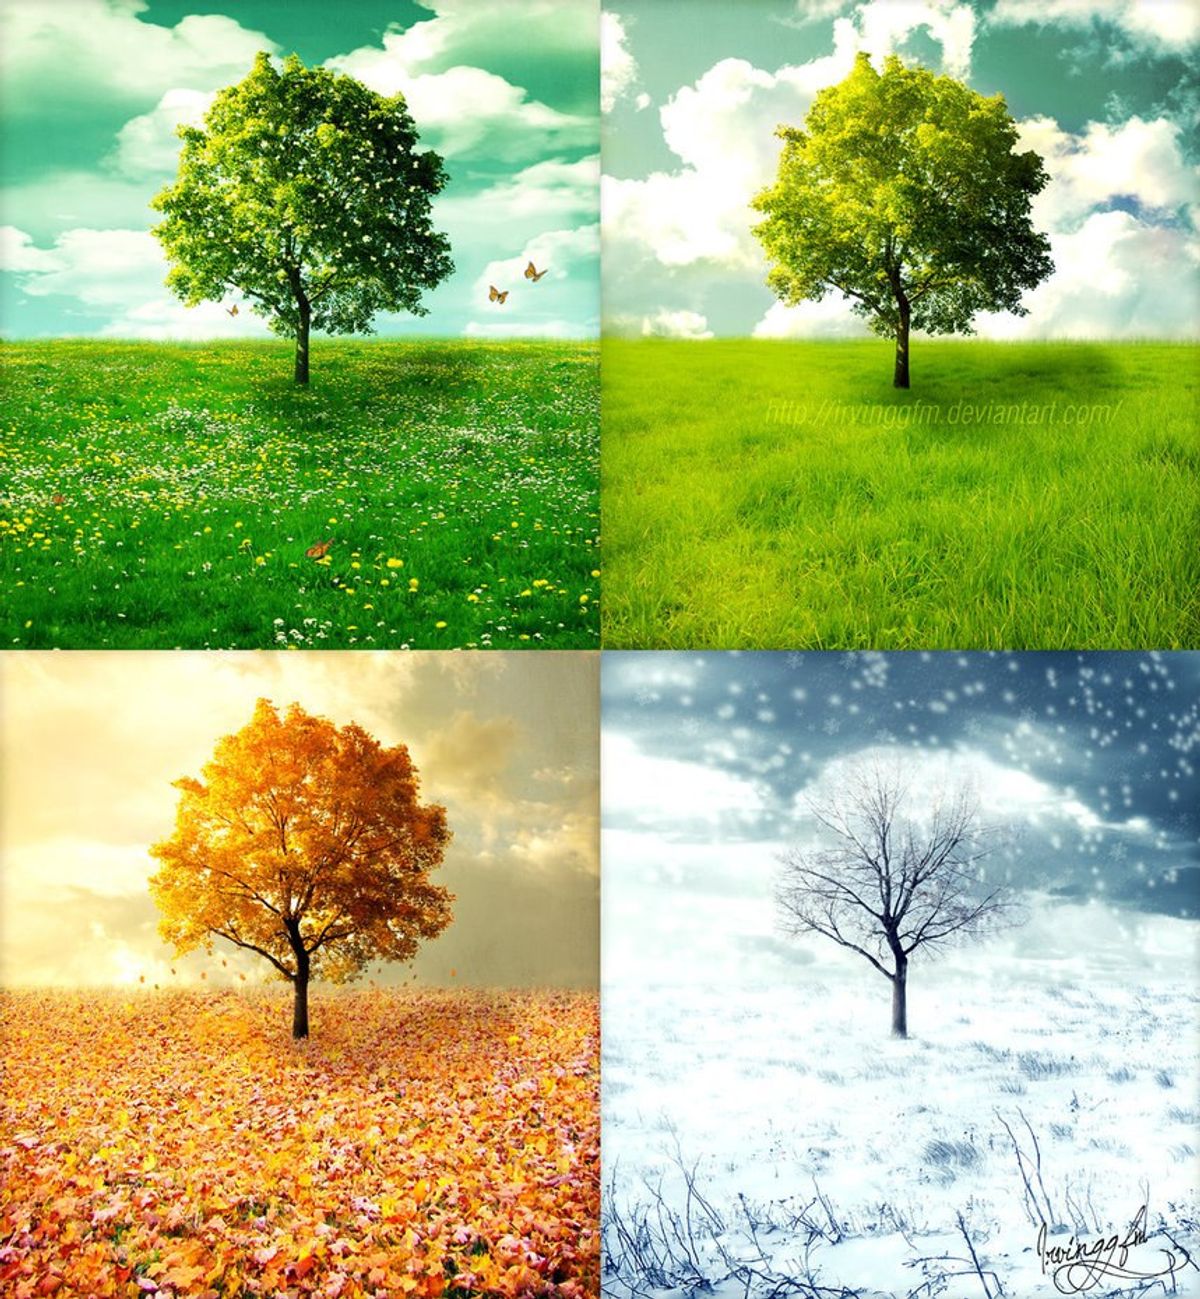 An Ode to the Seasons